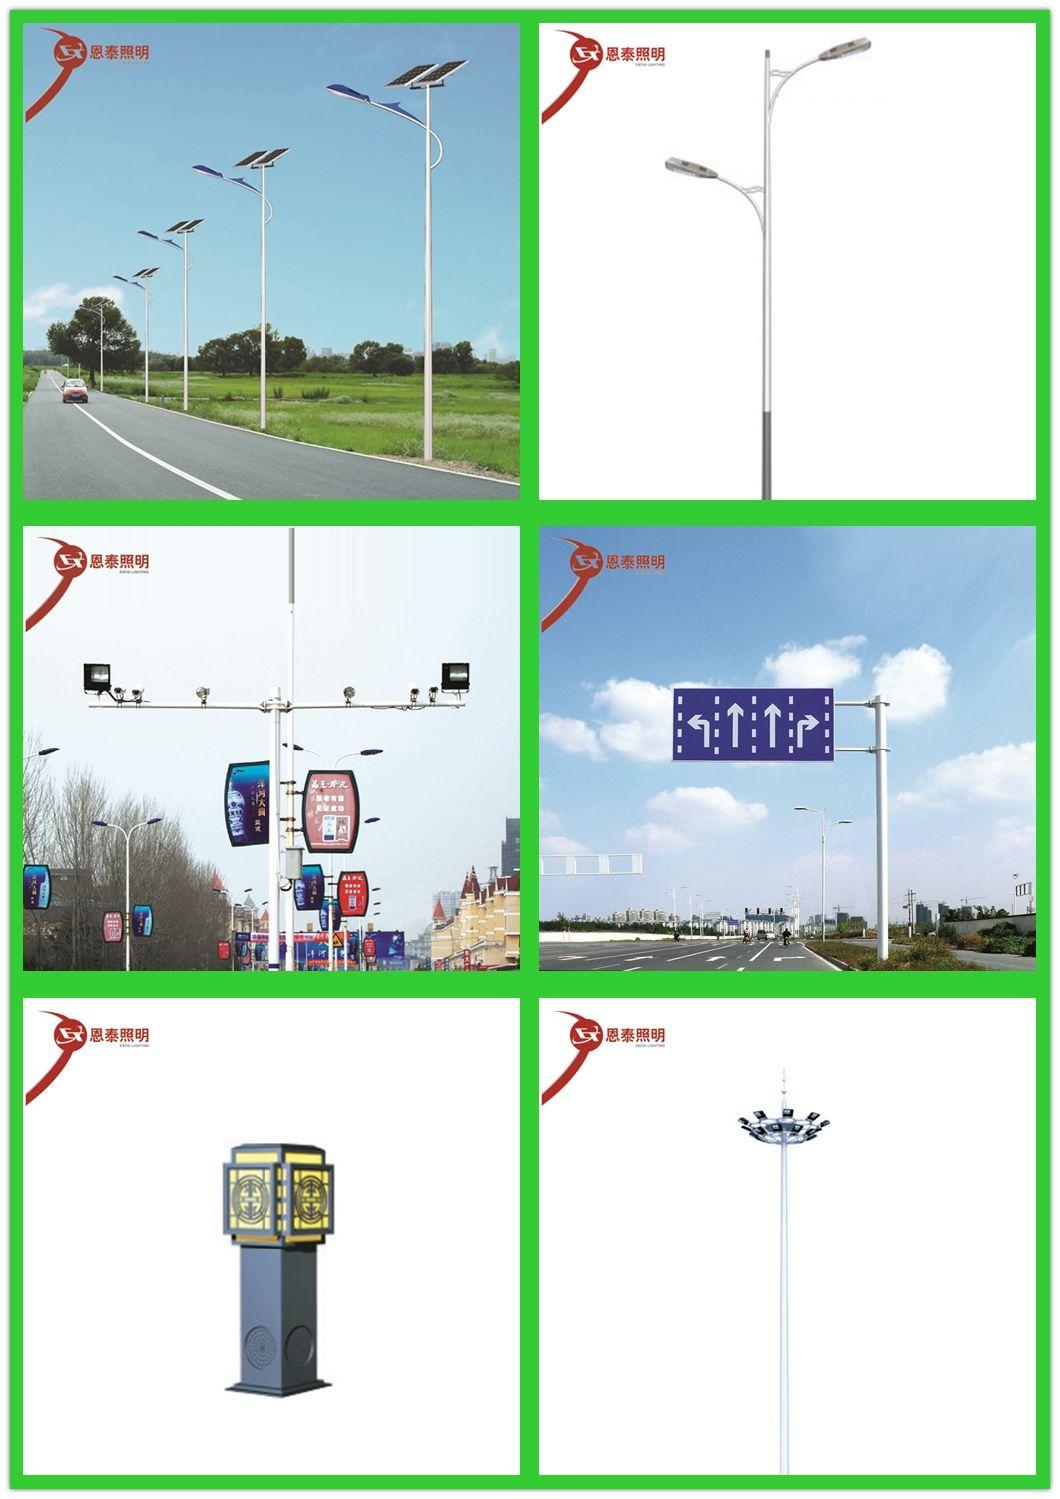 Efficient and Awesome Integrated All in One Solar LED Street Lights 60W